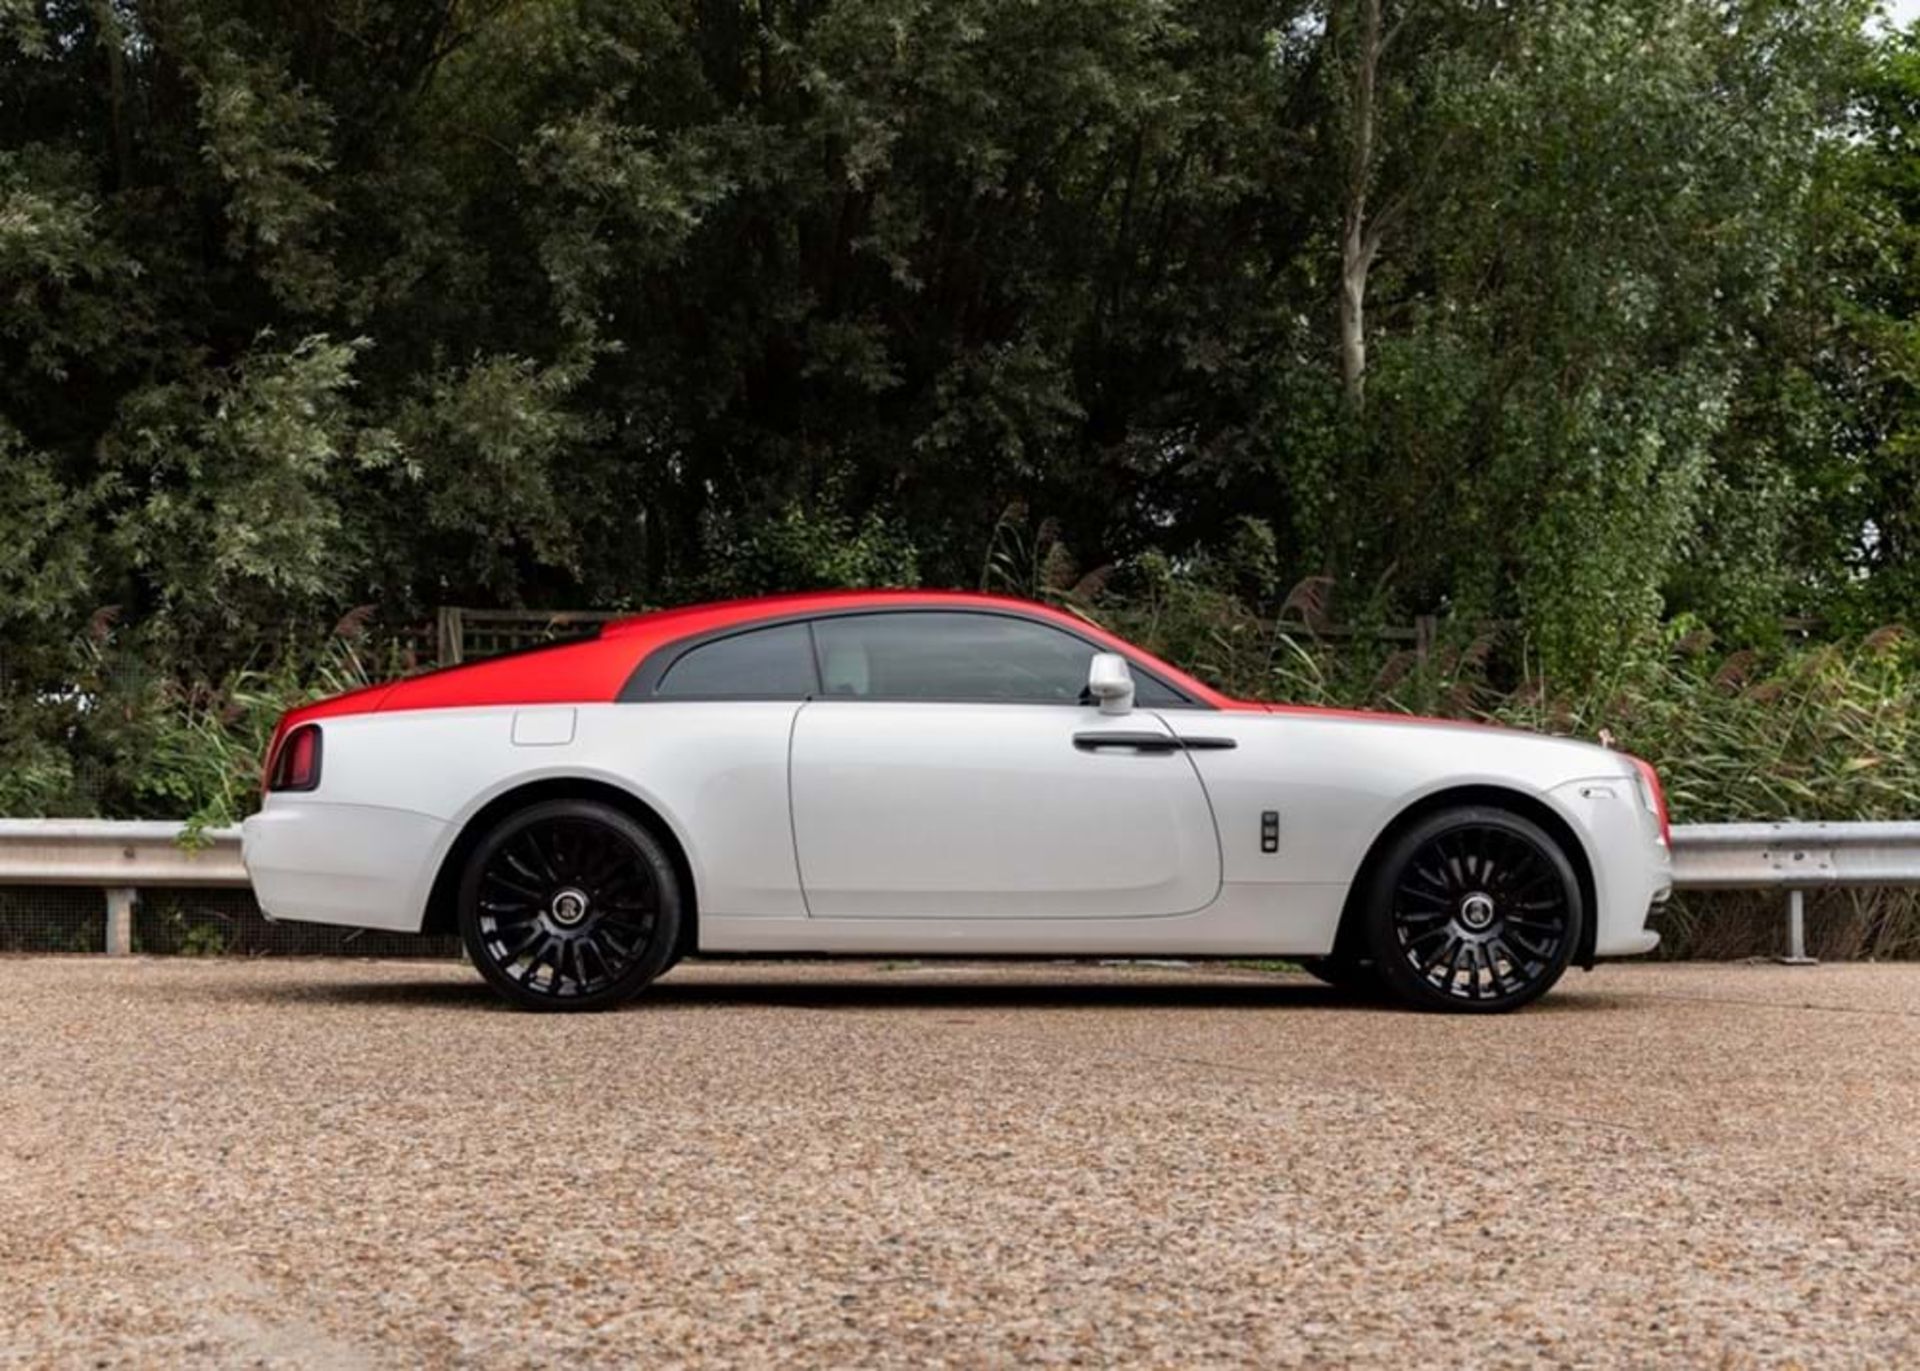 2016 Rolls-Royce Wraith 'Inspired by Fashion' - Image 5 of 21